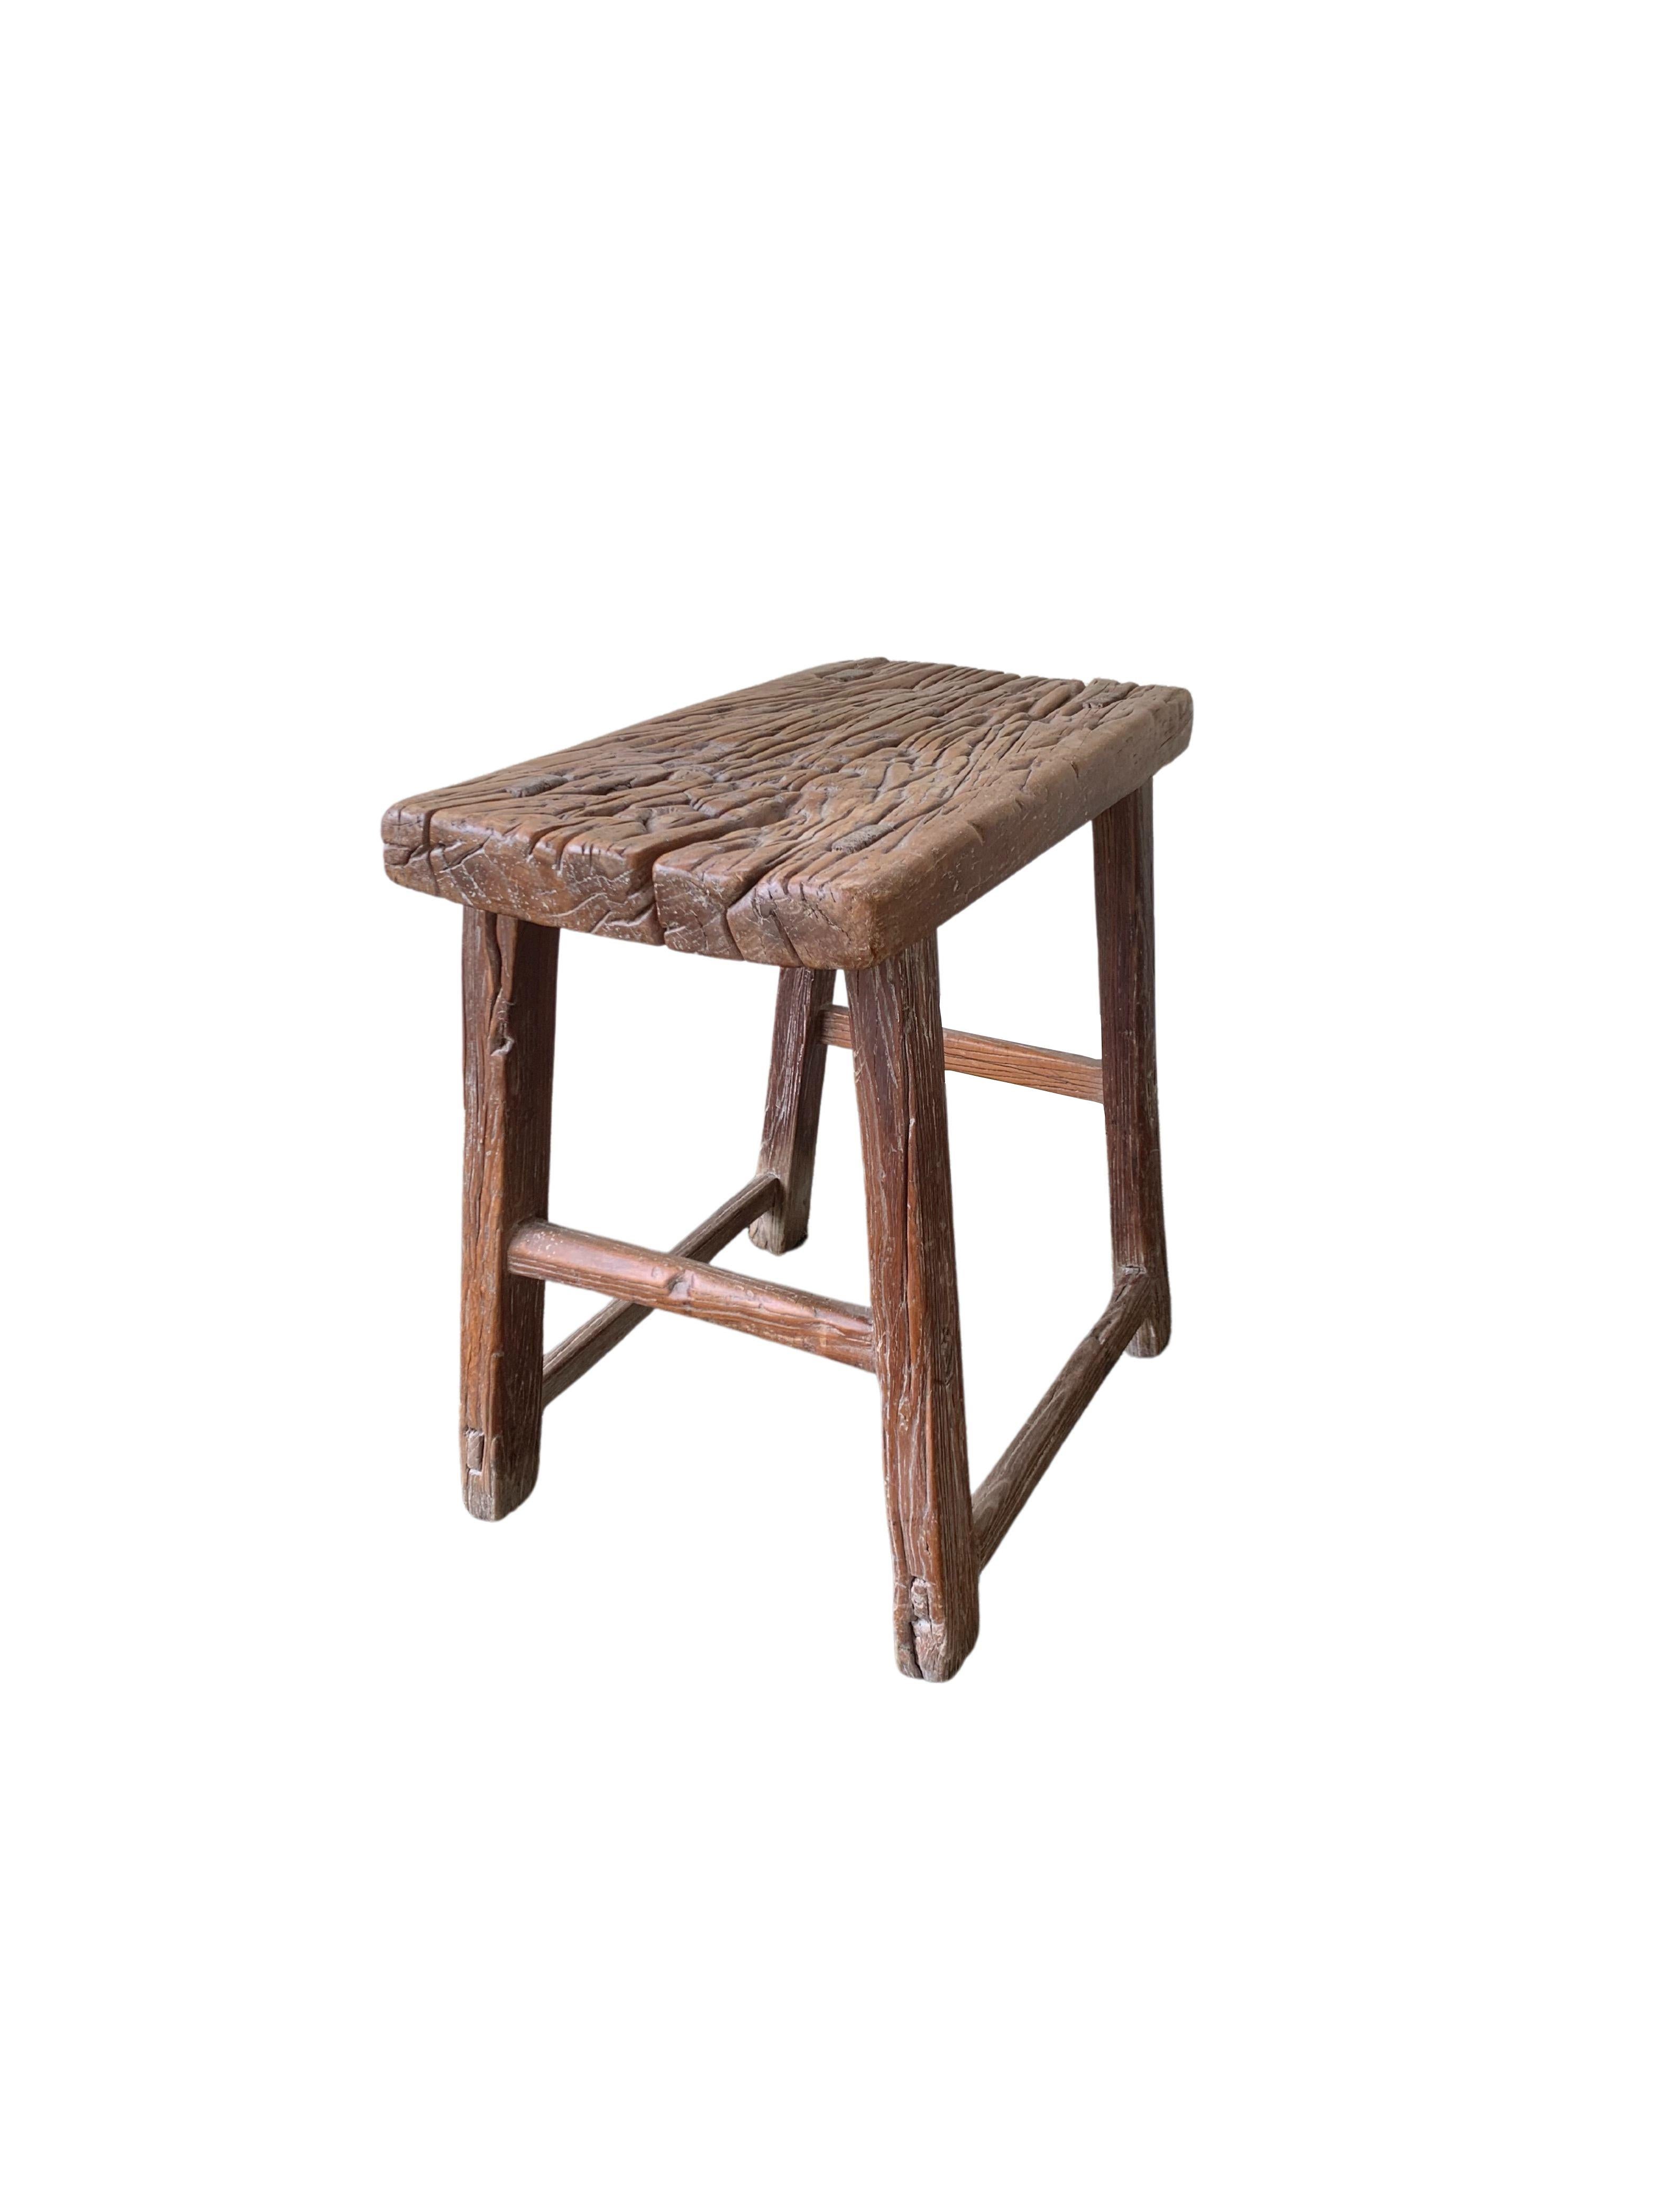 Hand-Carved Antique Chinese Elm Wood Stool, Early 20th Century For Sale